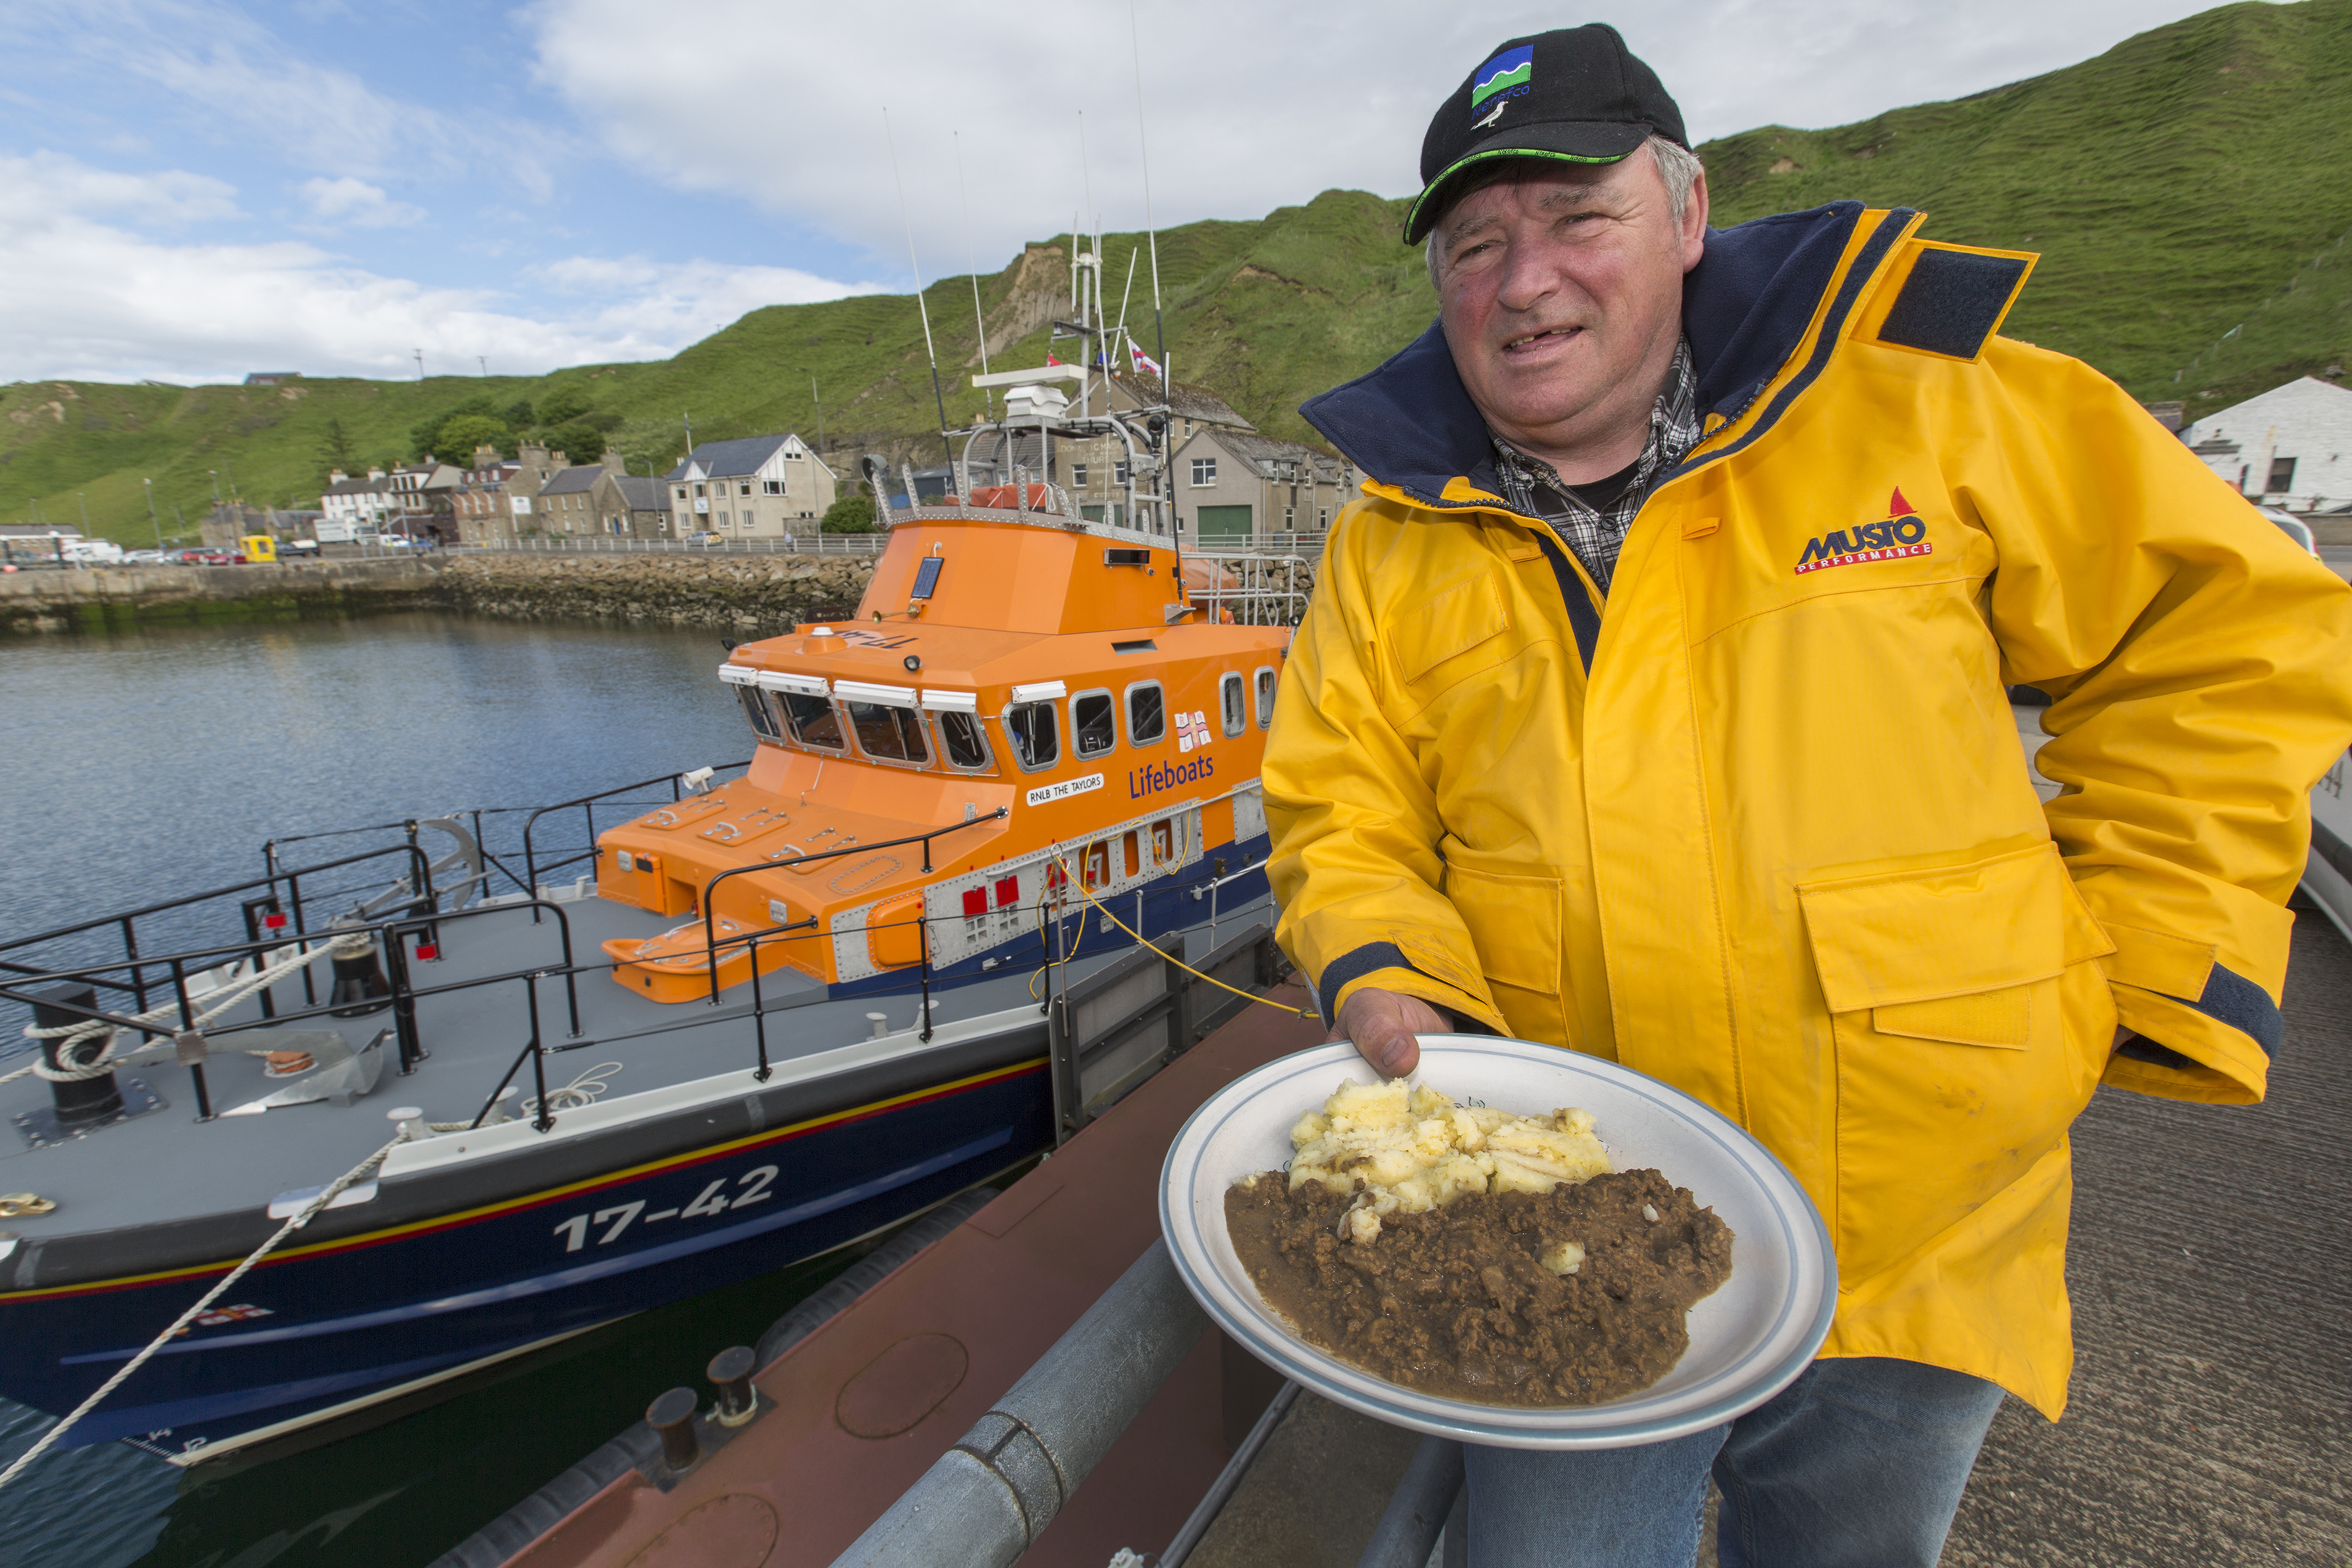 Thurso lifeboat coxswain William (Wing) Munro, with a plate of mince and tatties, awaiting the arrival of the gull he nursed back to health (Robert MacDonald / Northern Studios)